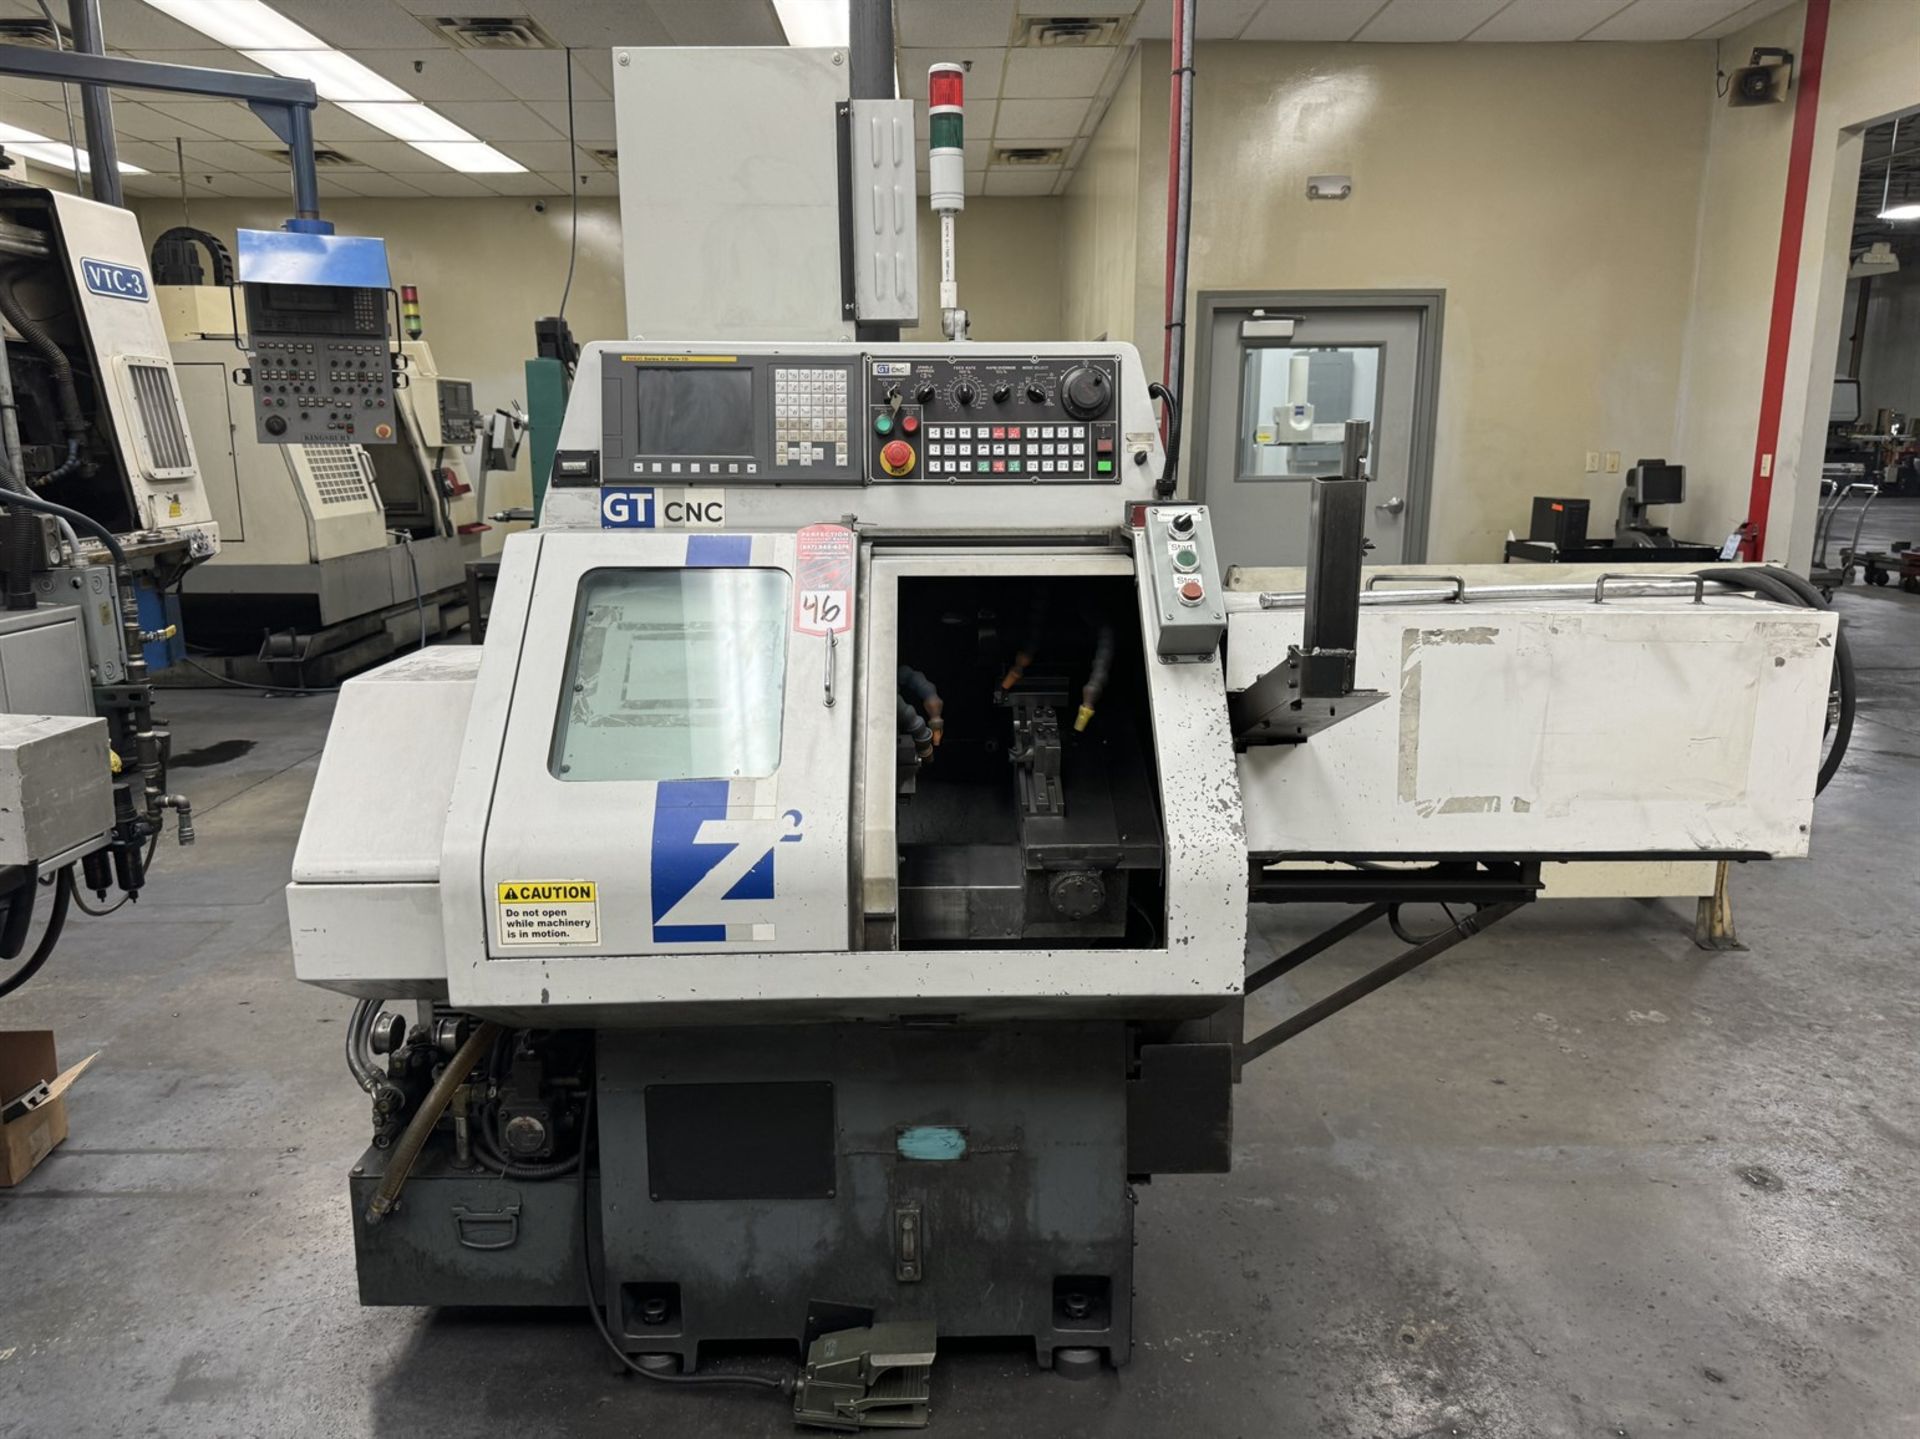 CUBIC GT Z2 CNC Gang Tool Lathe, s/n na, Fanuc Series Oi Mate-TD Control, 60mm Turning Dia, 120mm Sw - Image 2 of 7